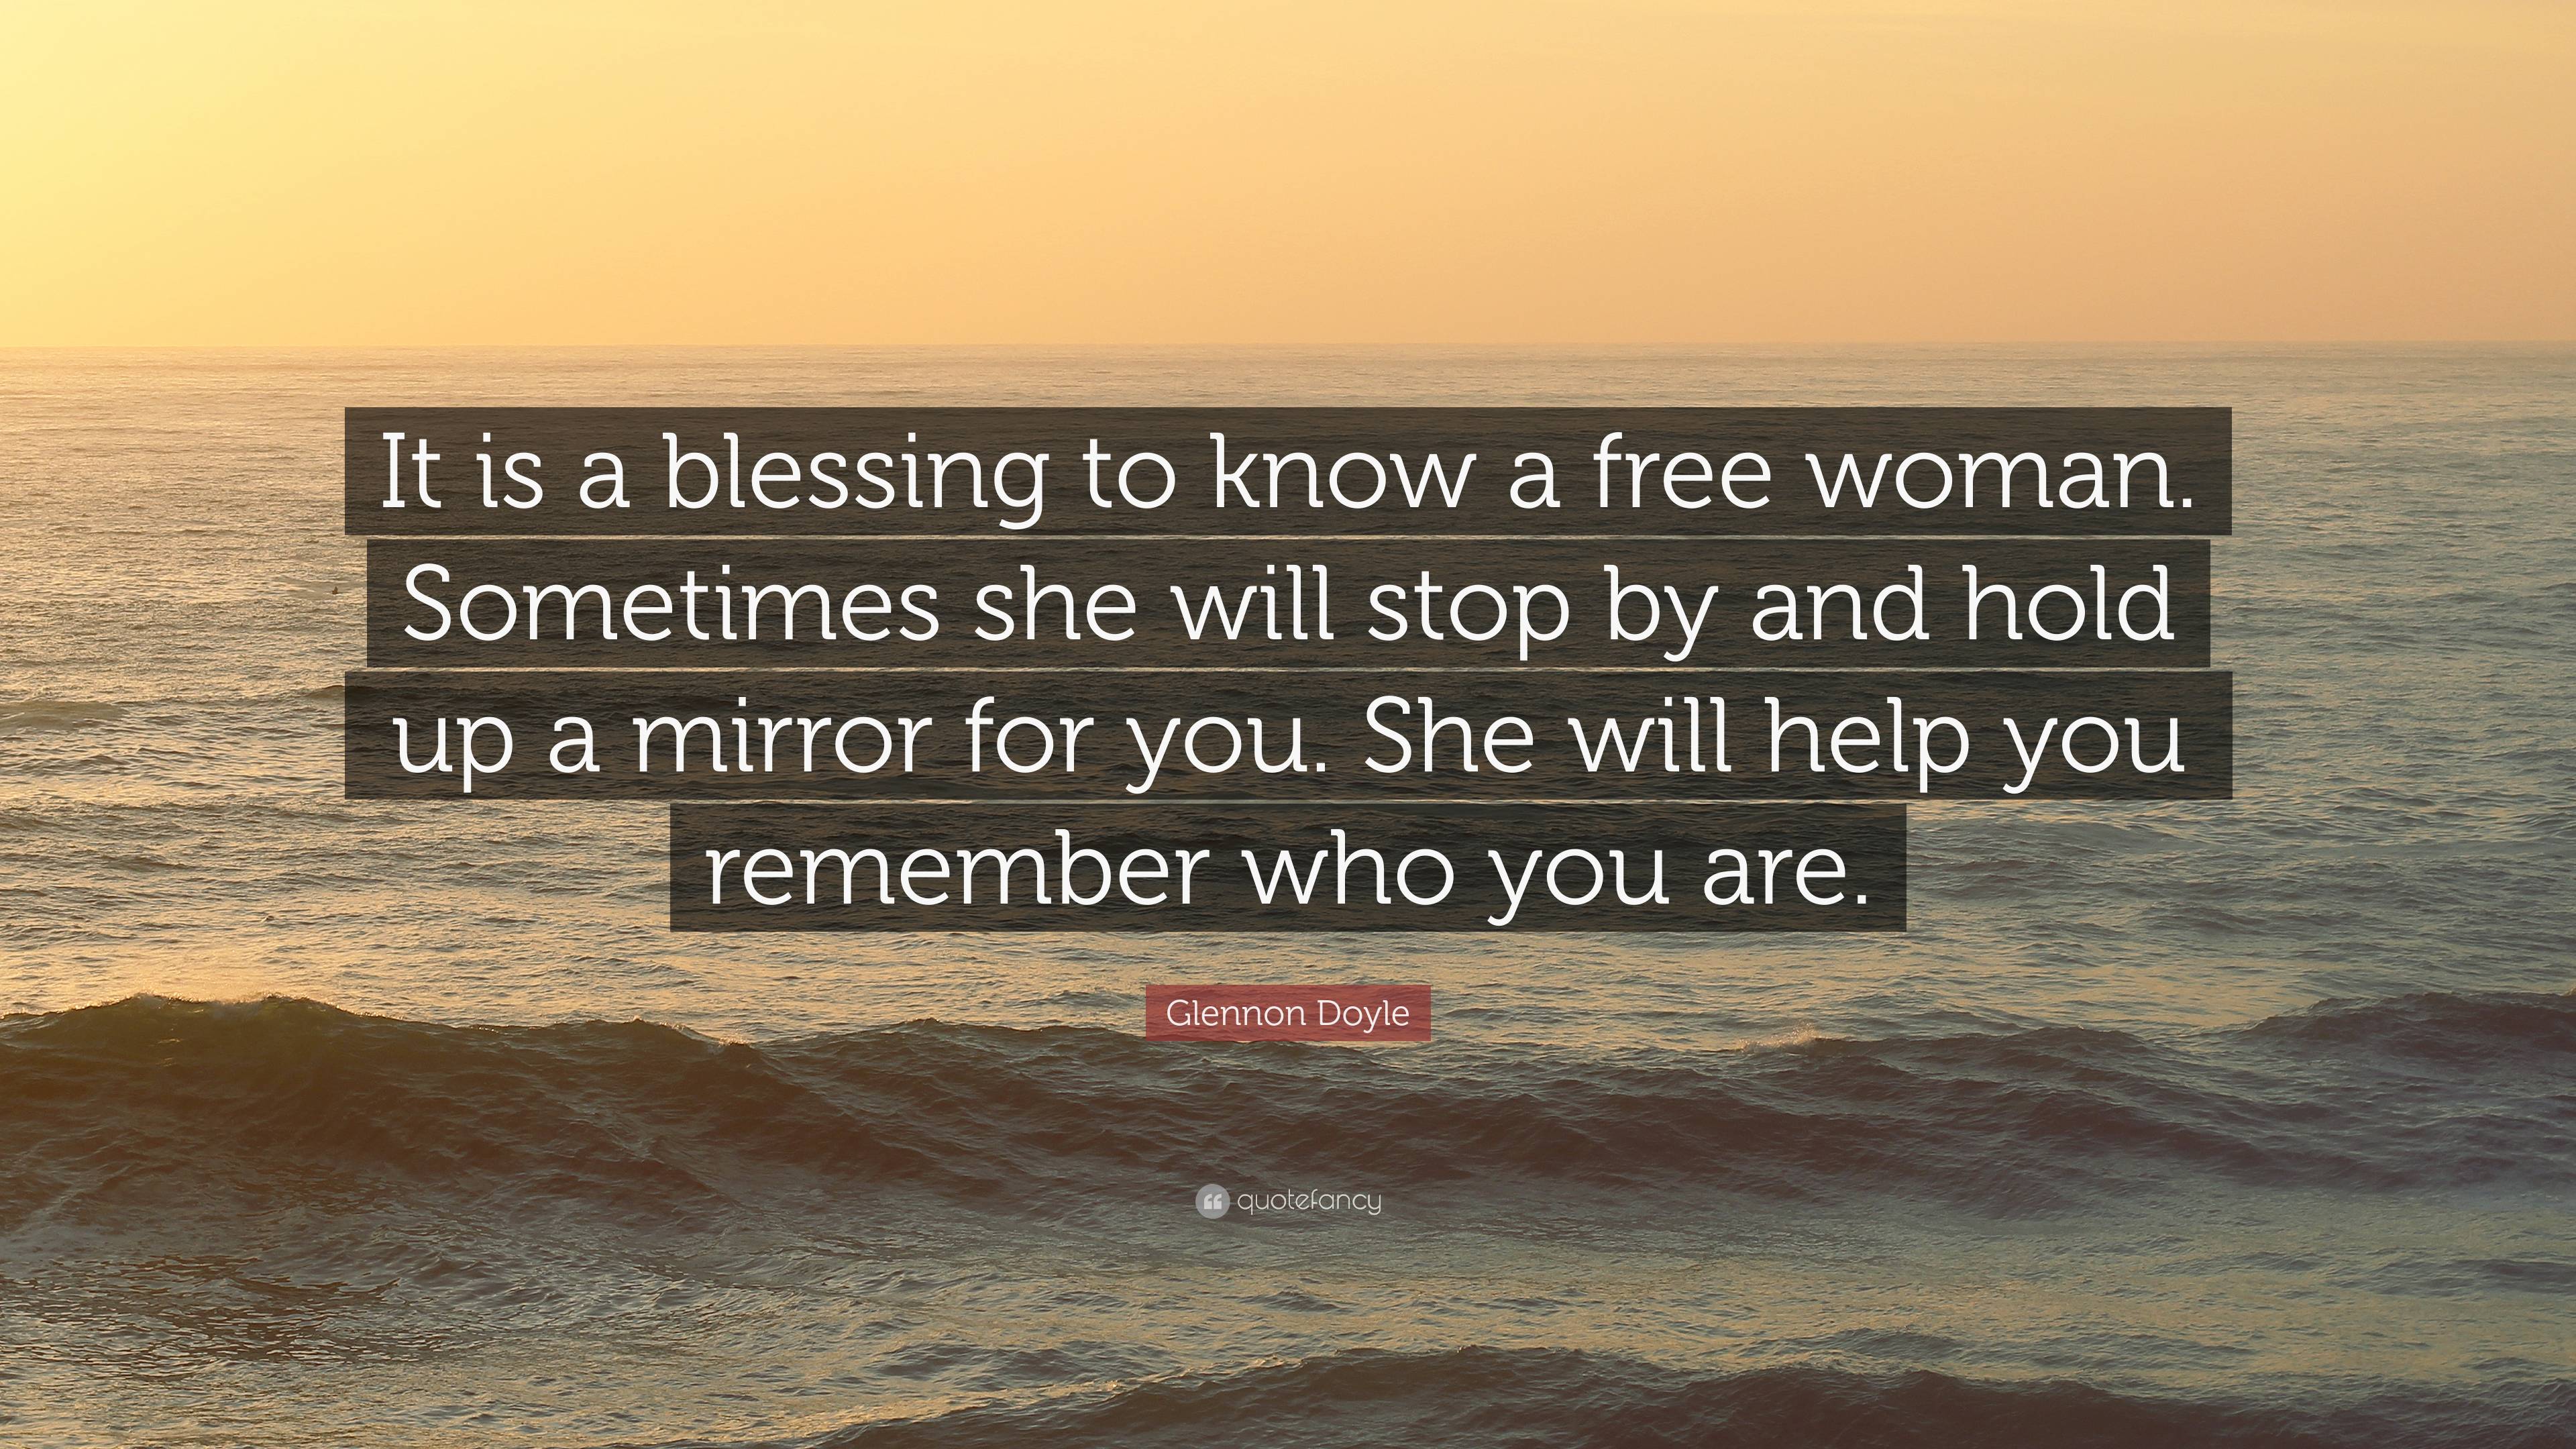 Glennon Doyle Quote: “It is a blessing to know a free woman. Sometimes ...